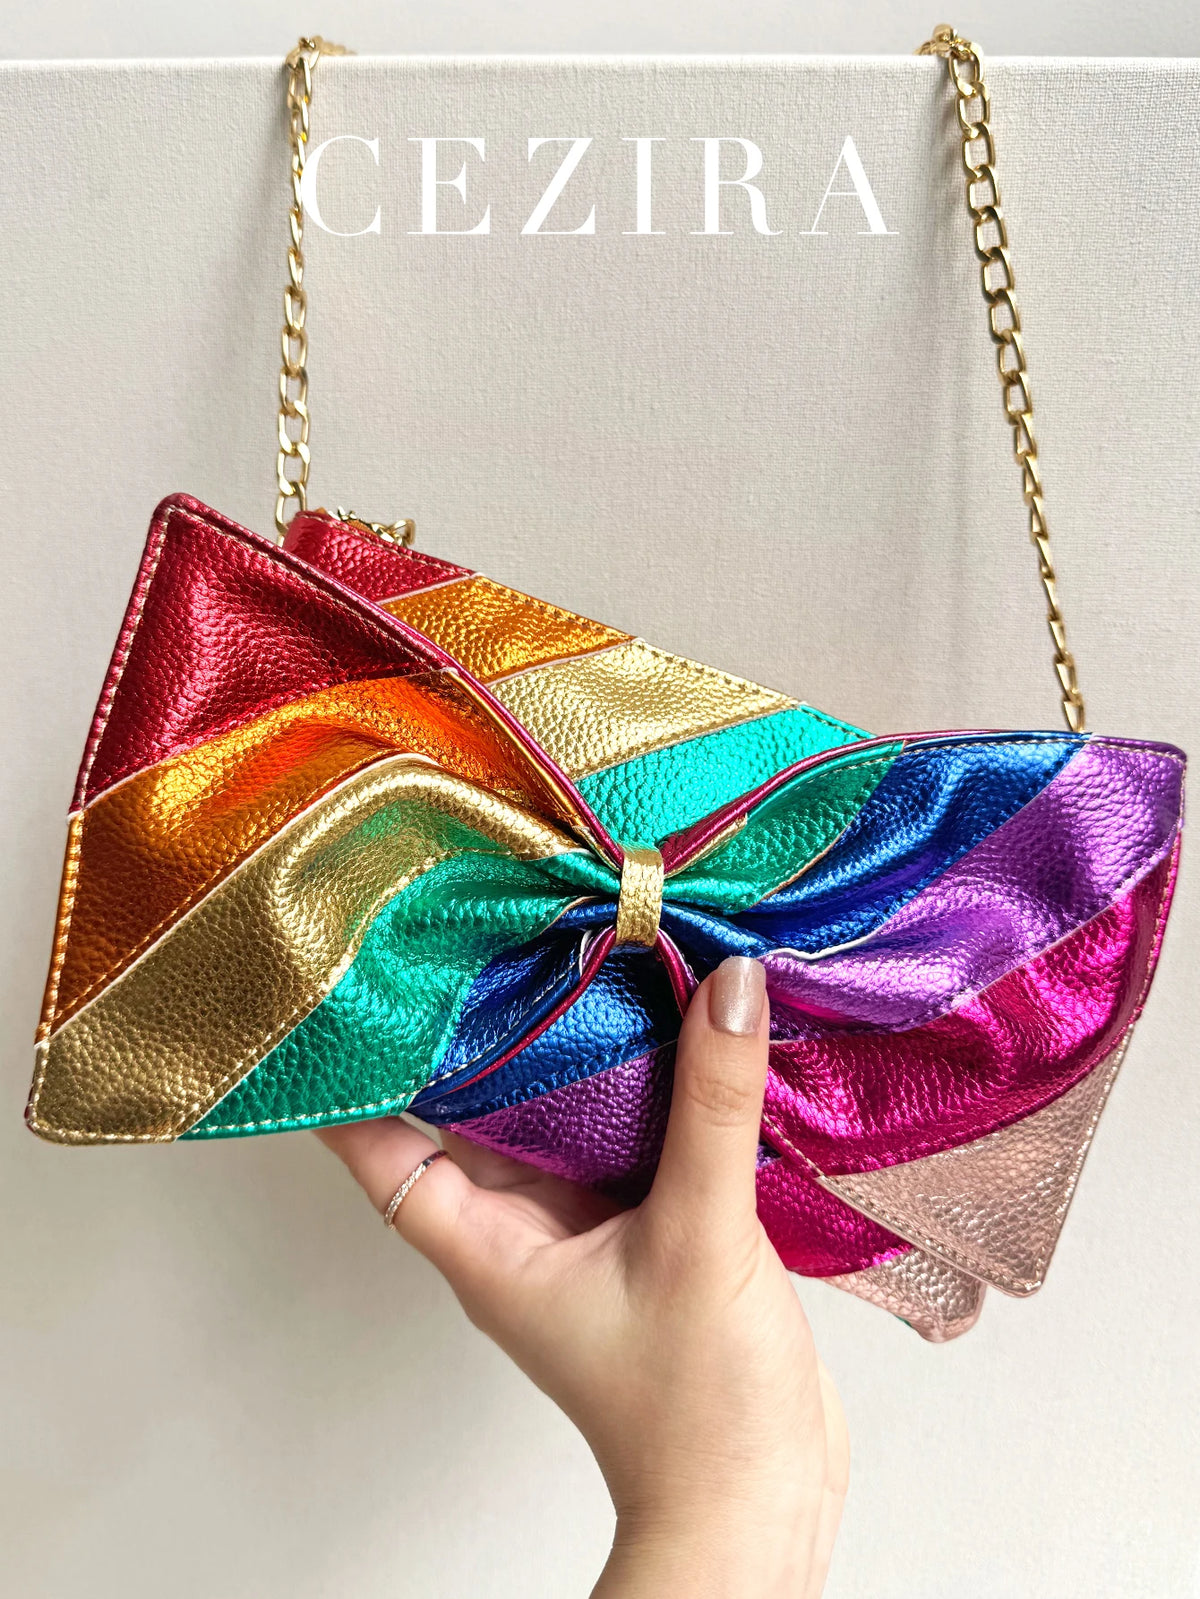 Luxury Metallic Vegan Leather Handbag - Colorful Stripes Patchwork PU Bow Knot Clutch with Chain, Funky Y2K Style